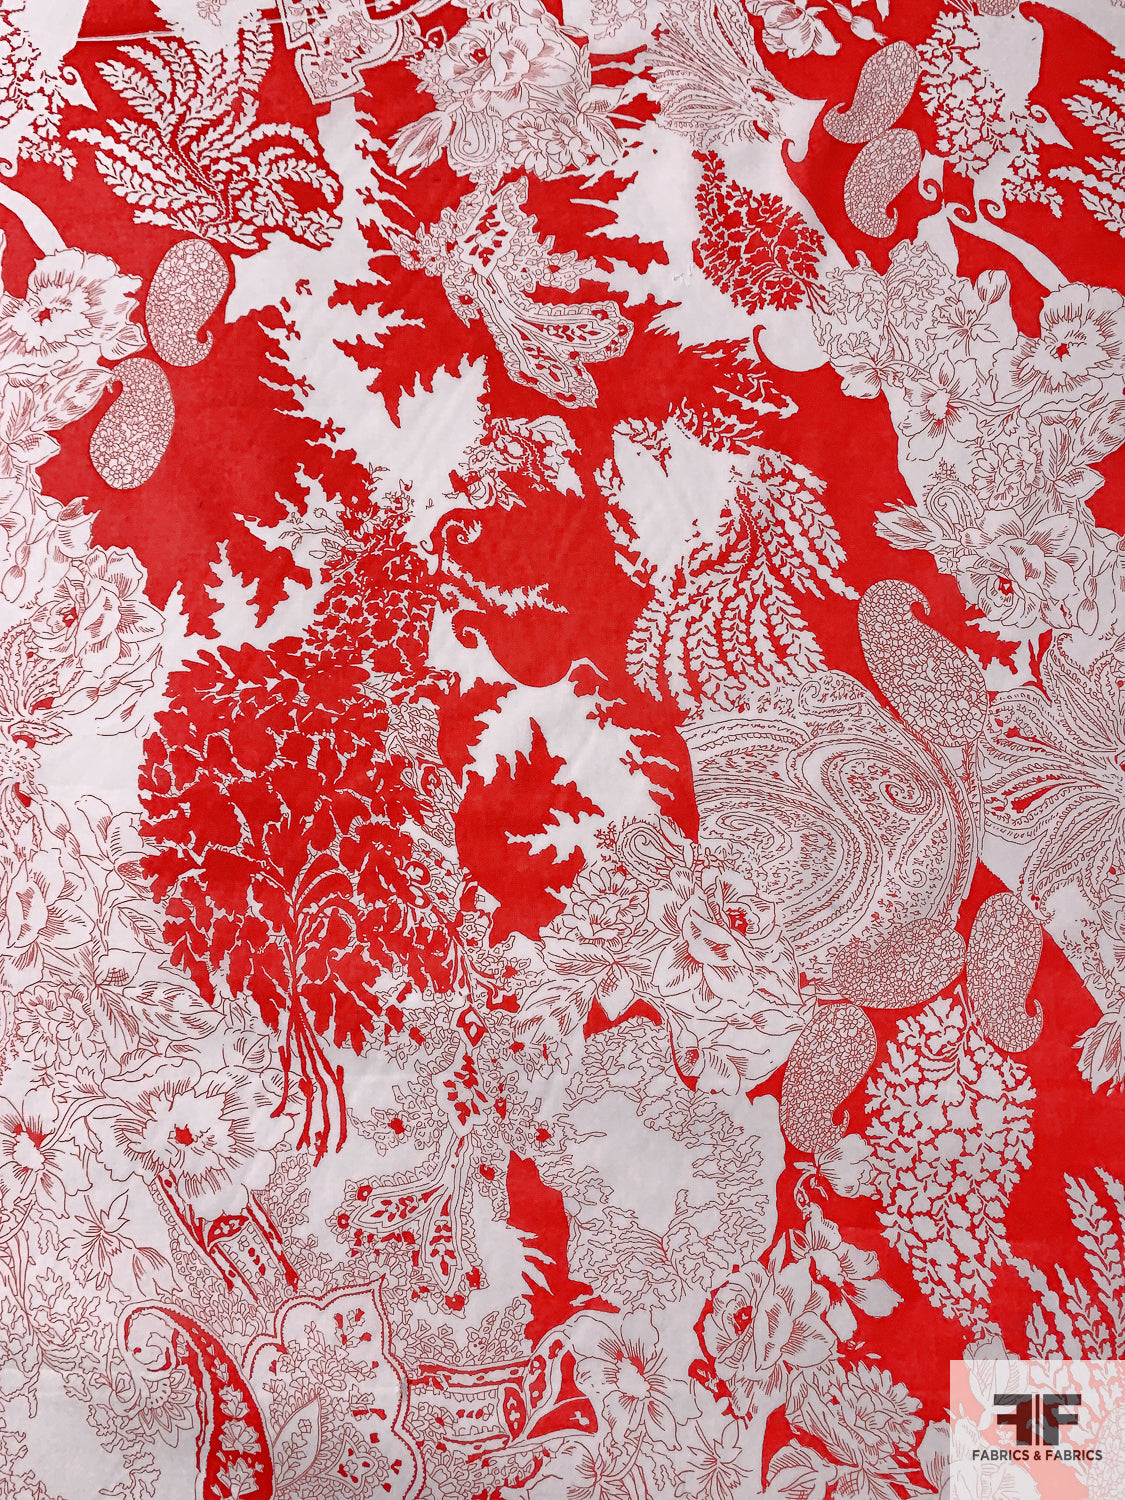 Exotic Paisley and Floral Printed Cotton Lawn - Coral Red / Off-White